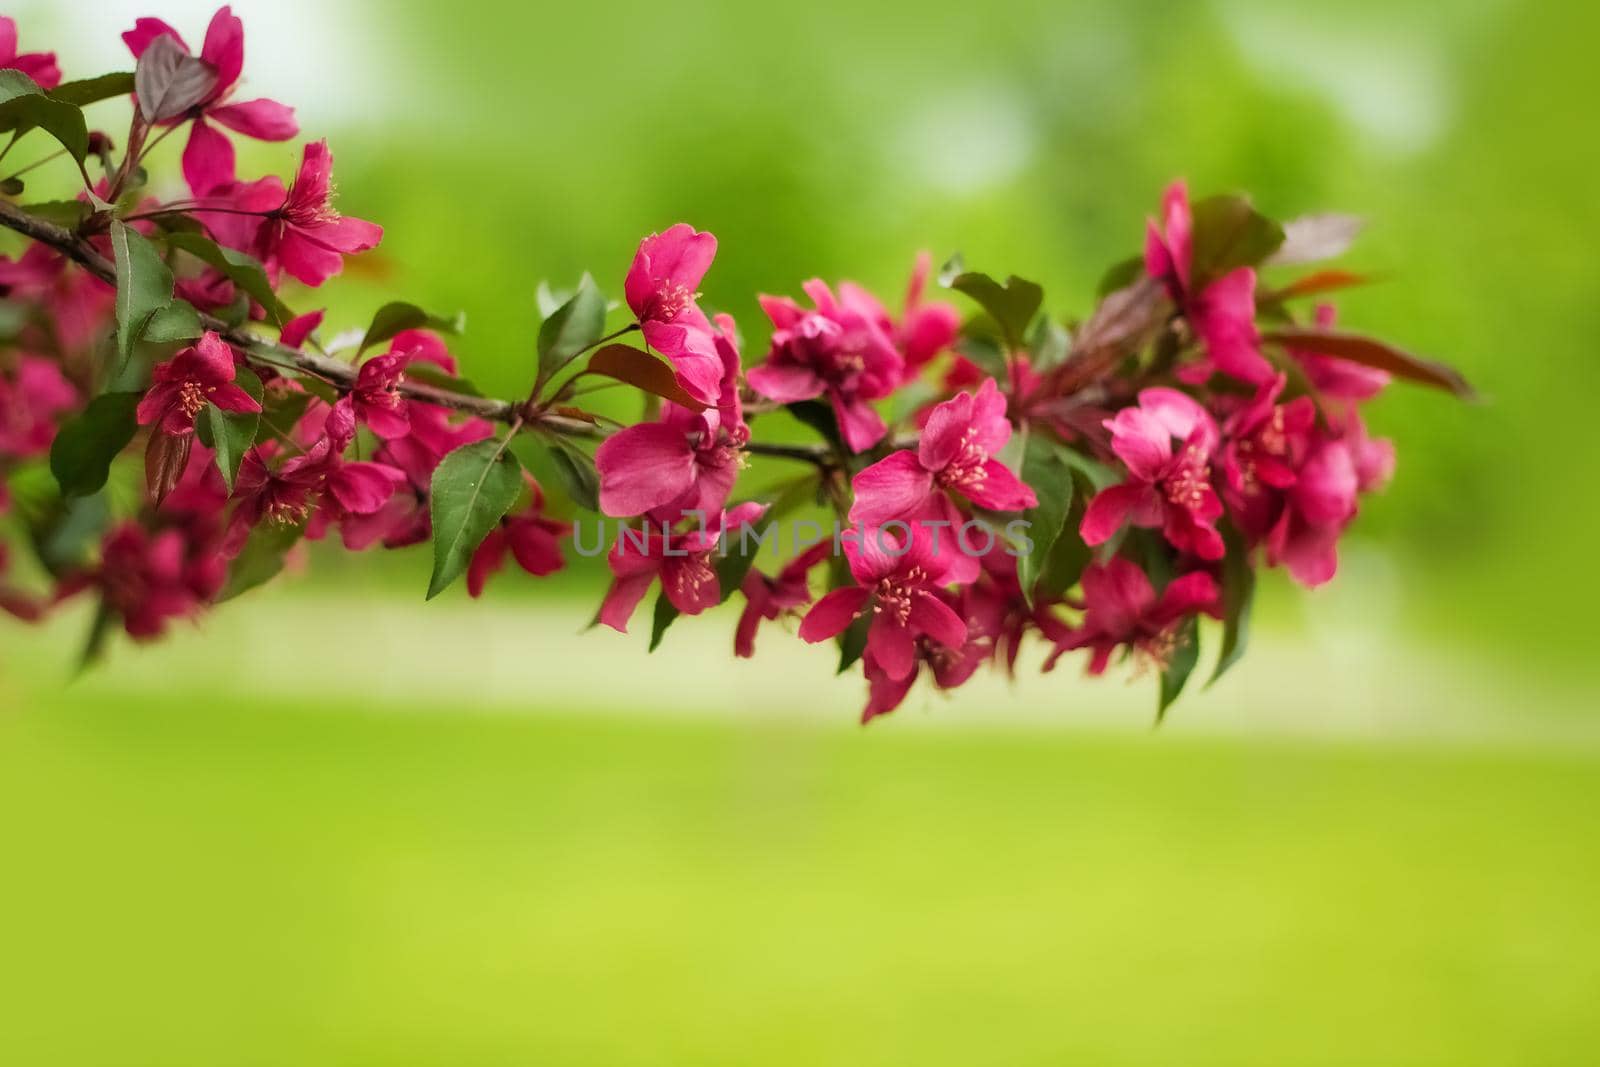 A branch of a blossoming decorative apple tree with red flowers, focus in the foreground, blurred background, selective focus. Spring flowers.